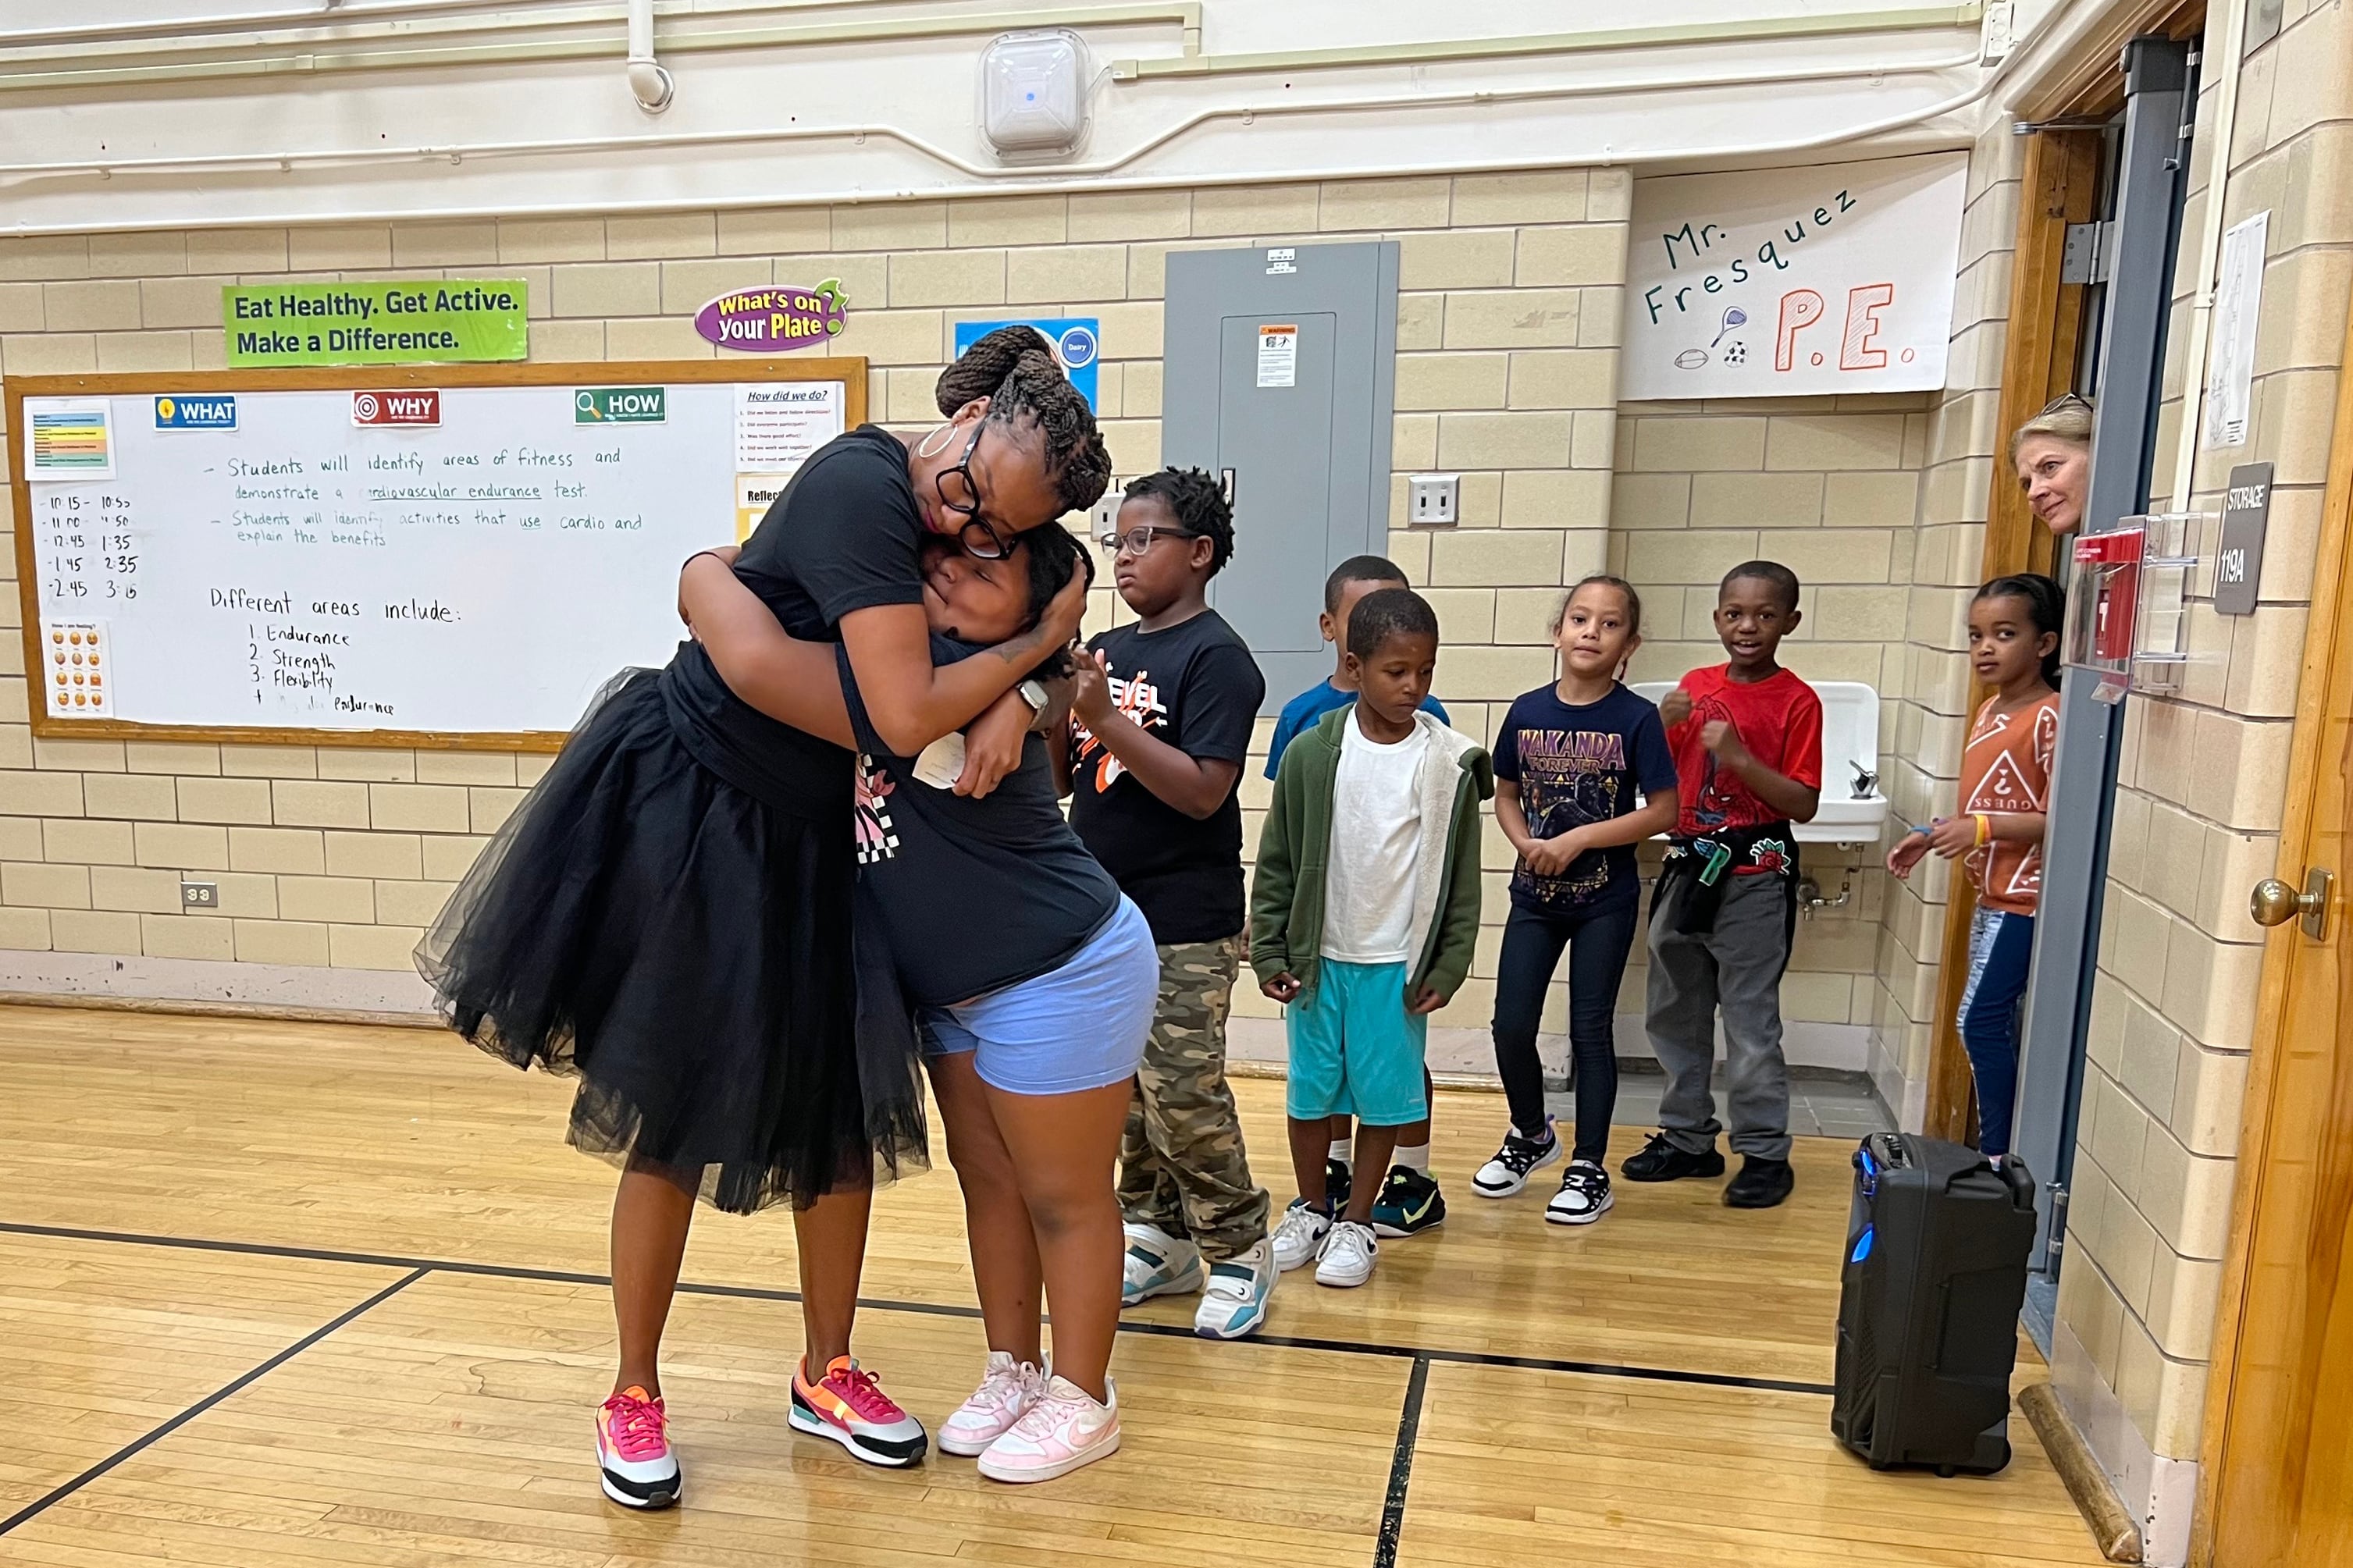 An elementary school principal wearing a tutu skirt hugs a student in the gymnasium.